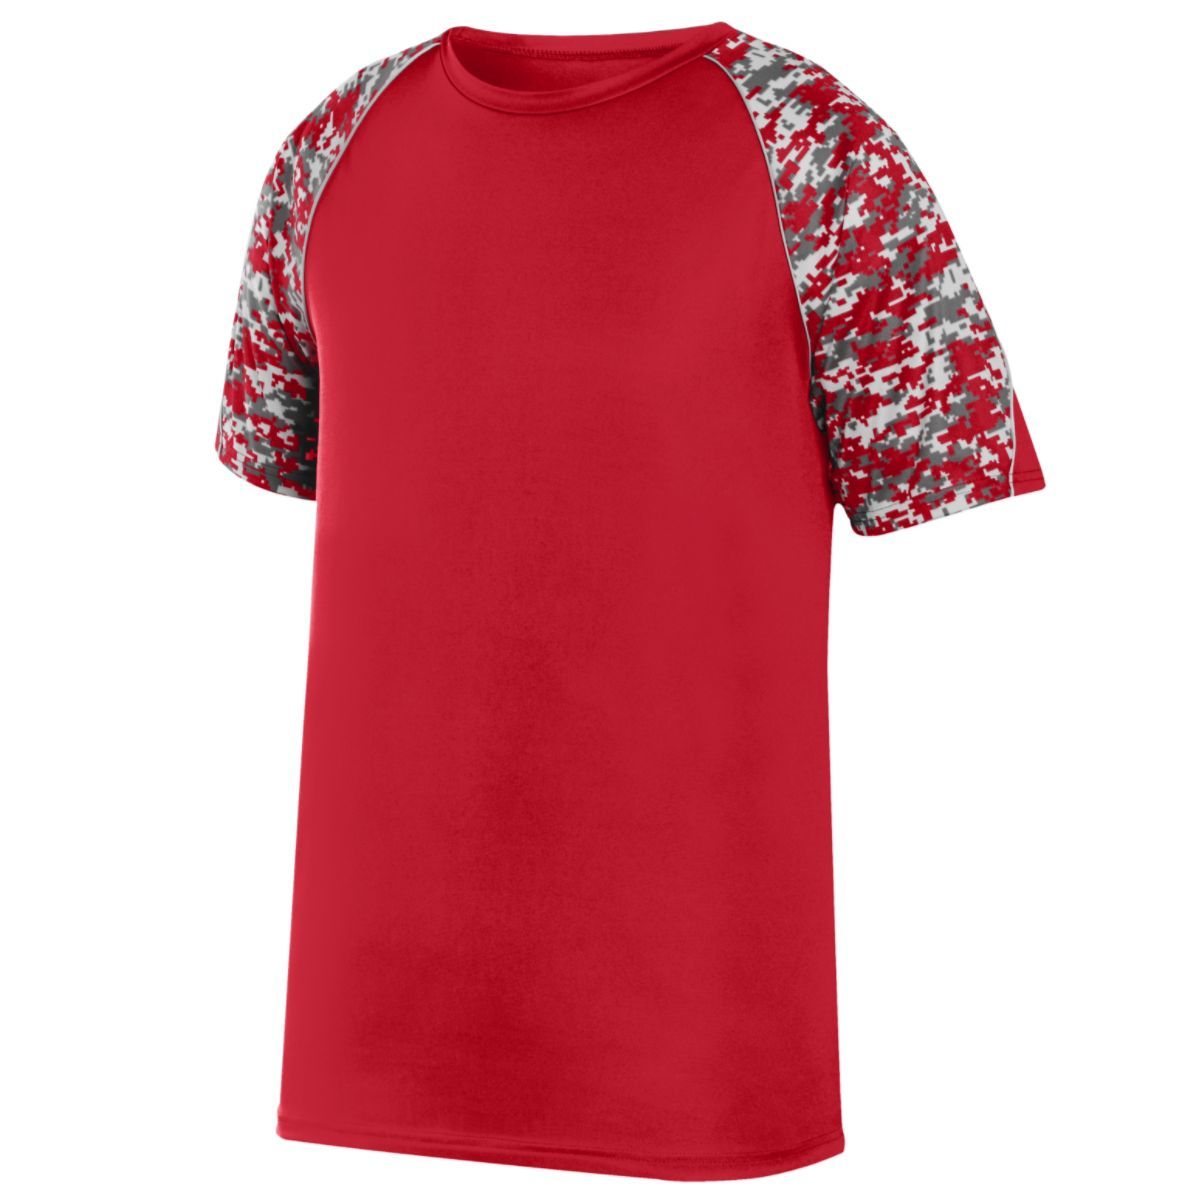 Augusta Sportswear Color Block Digi Camo Jersey in Red/Red Digi/Silver  -Part of the Adult, Adult-Jersey, Augusta-Products, Baseball, Shirts, All-Sports, All-Sports-1 product lines at KanaleyCreations.com